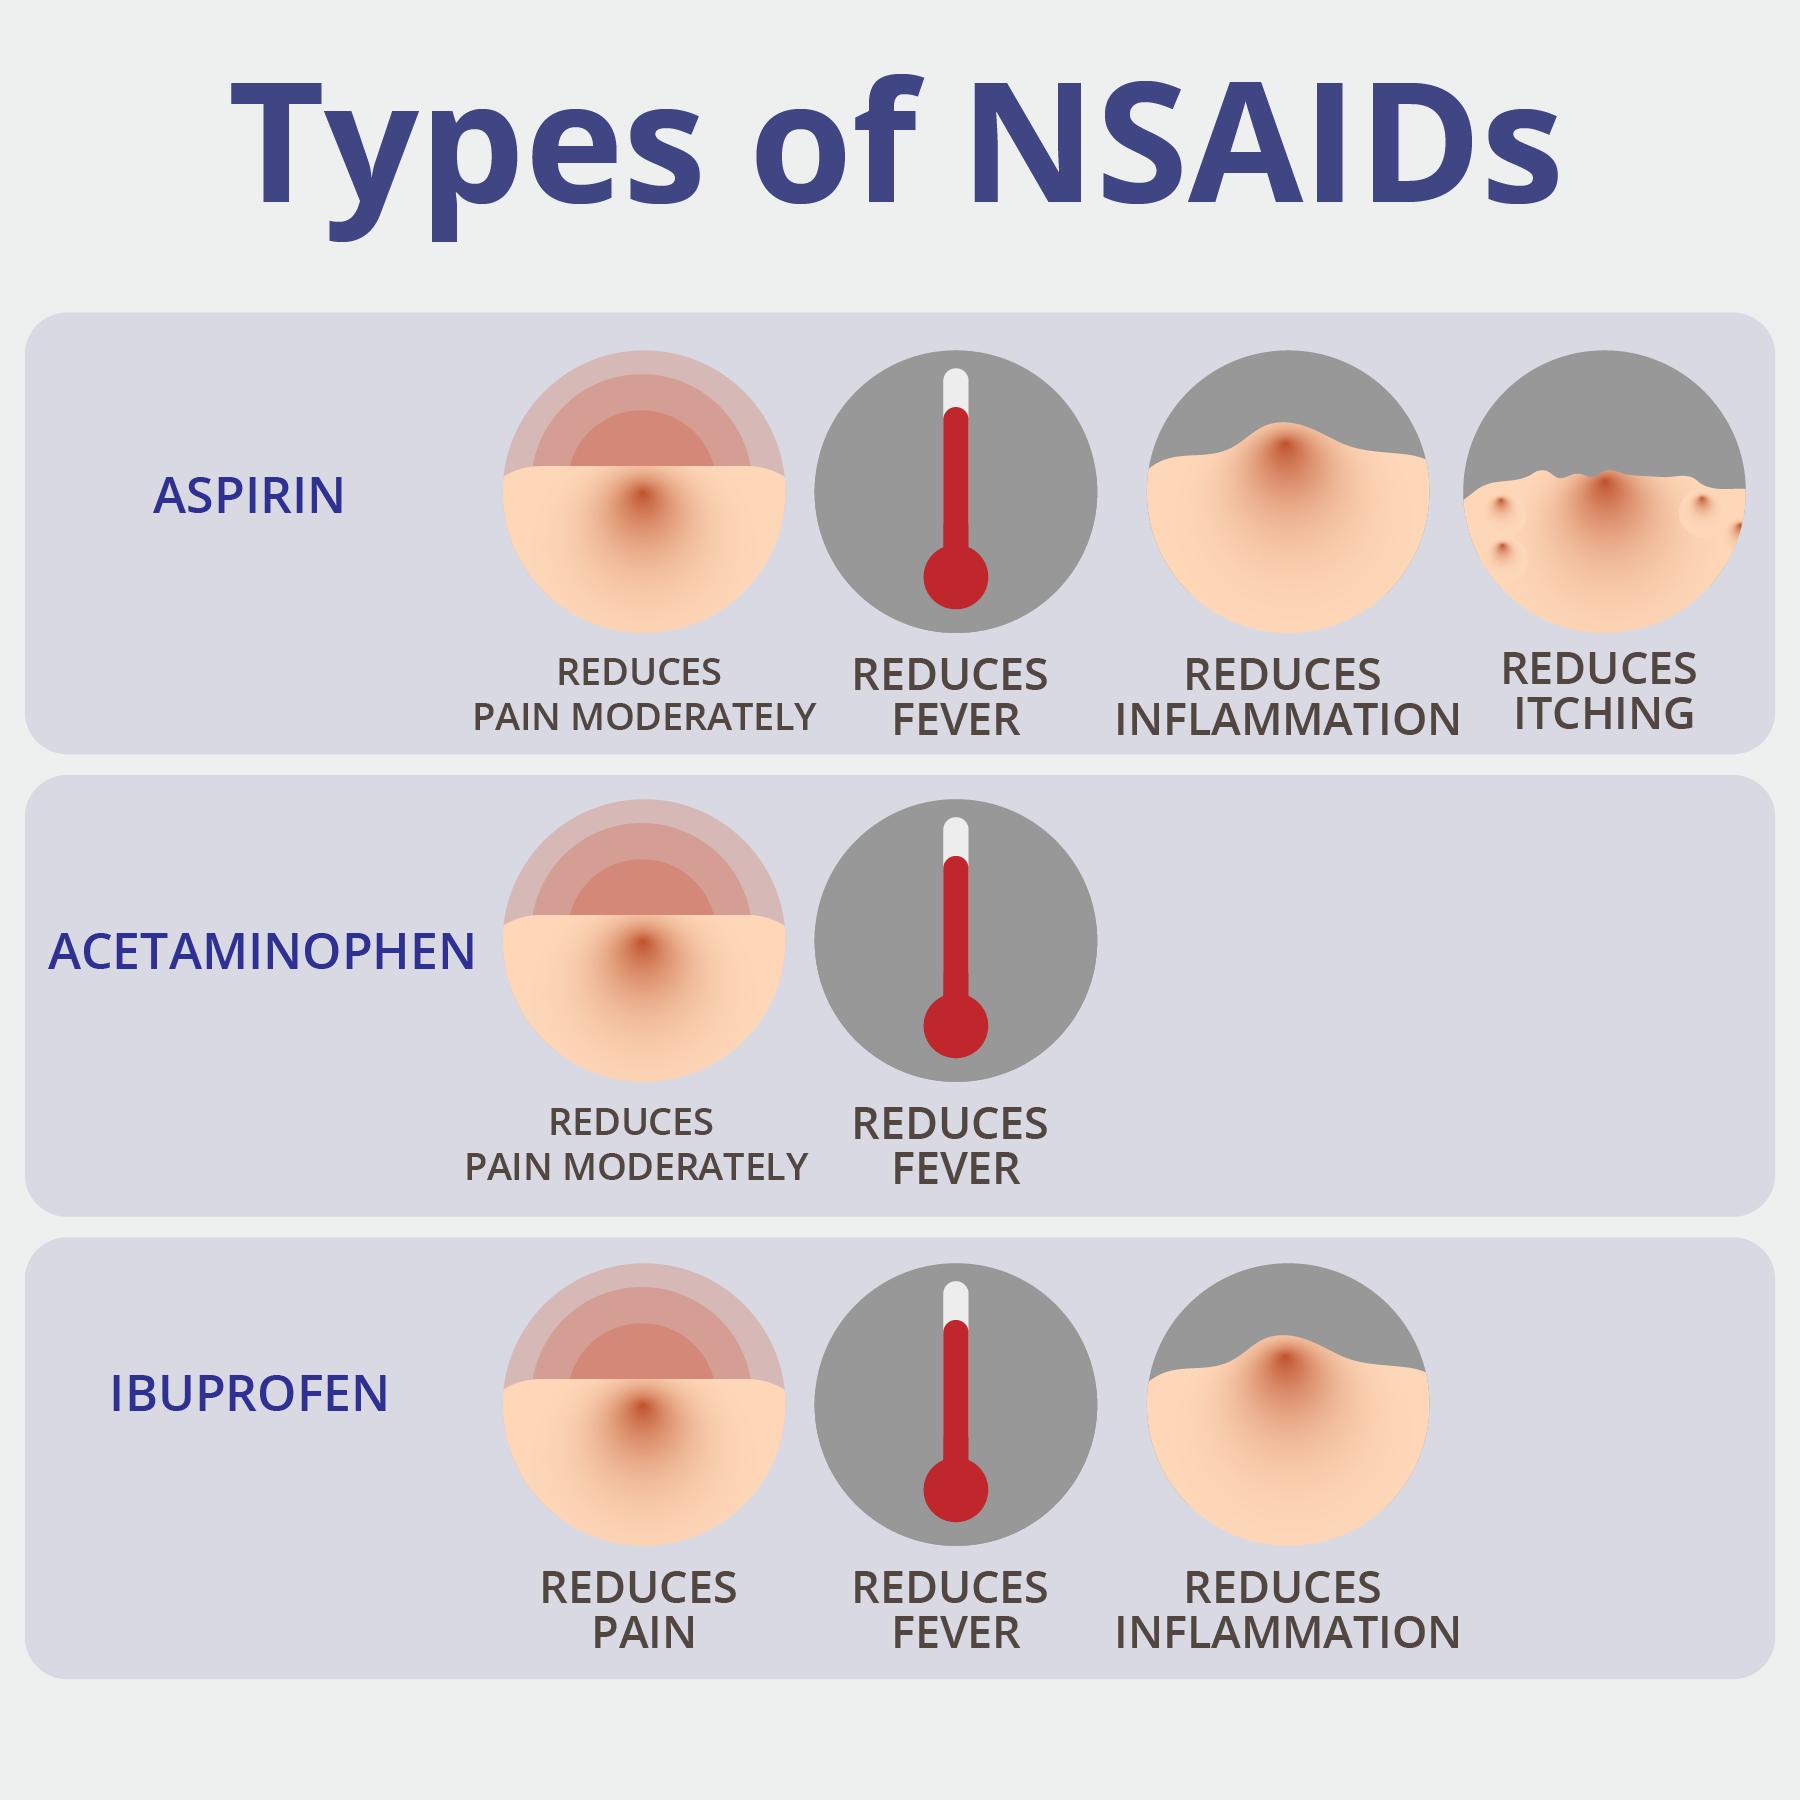 A table comparing three types of NSAIDs: aspirin, acetaminophen, and ibuprofen, and their effectiveness at reducing pain, fever, inflammation, and itching.